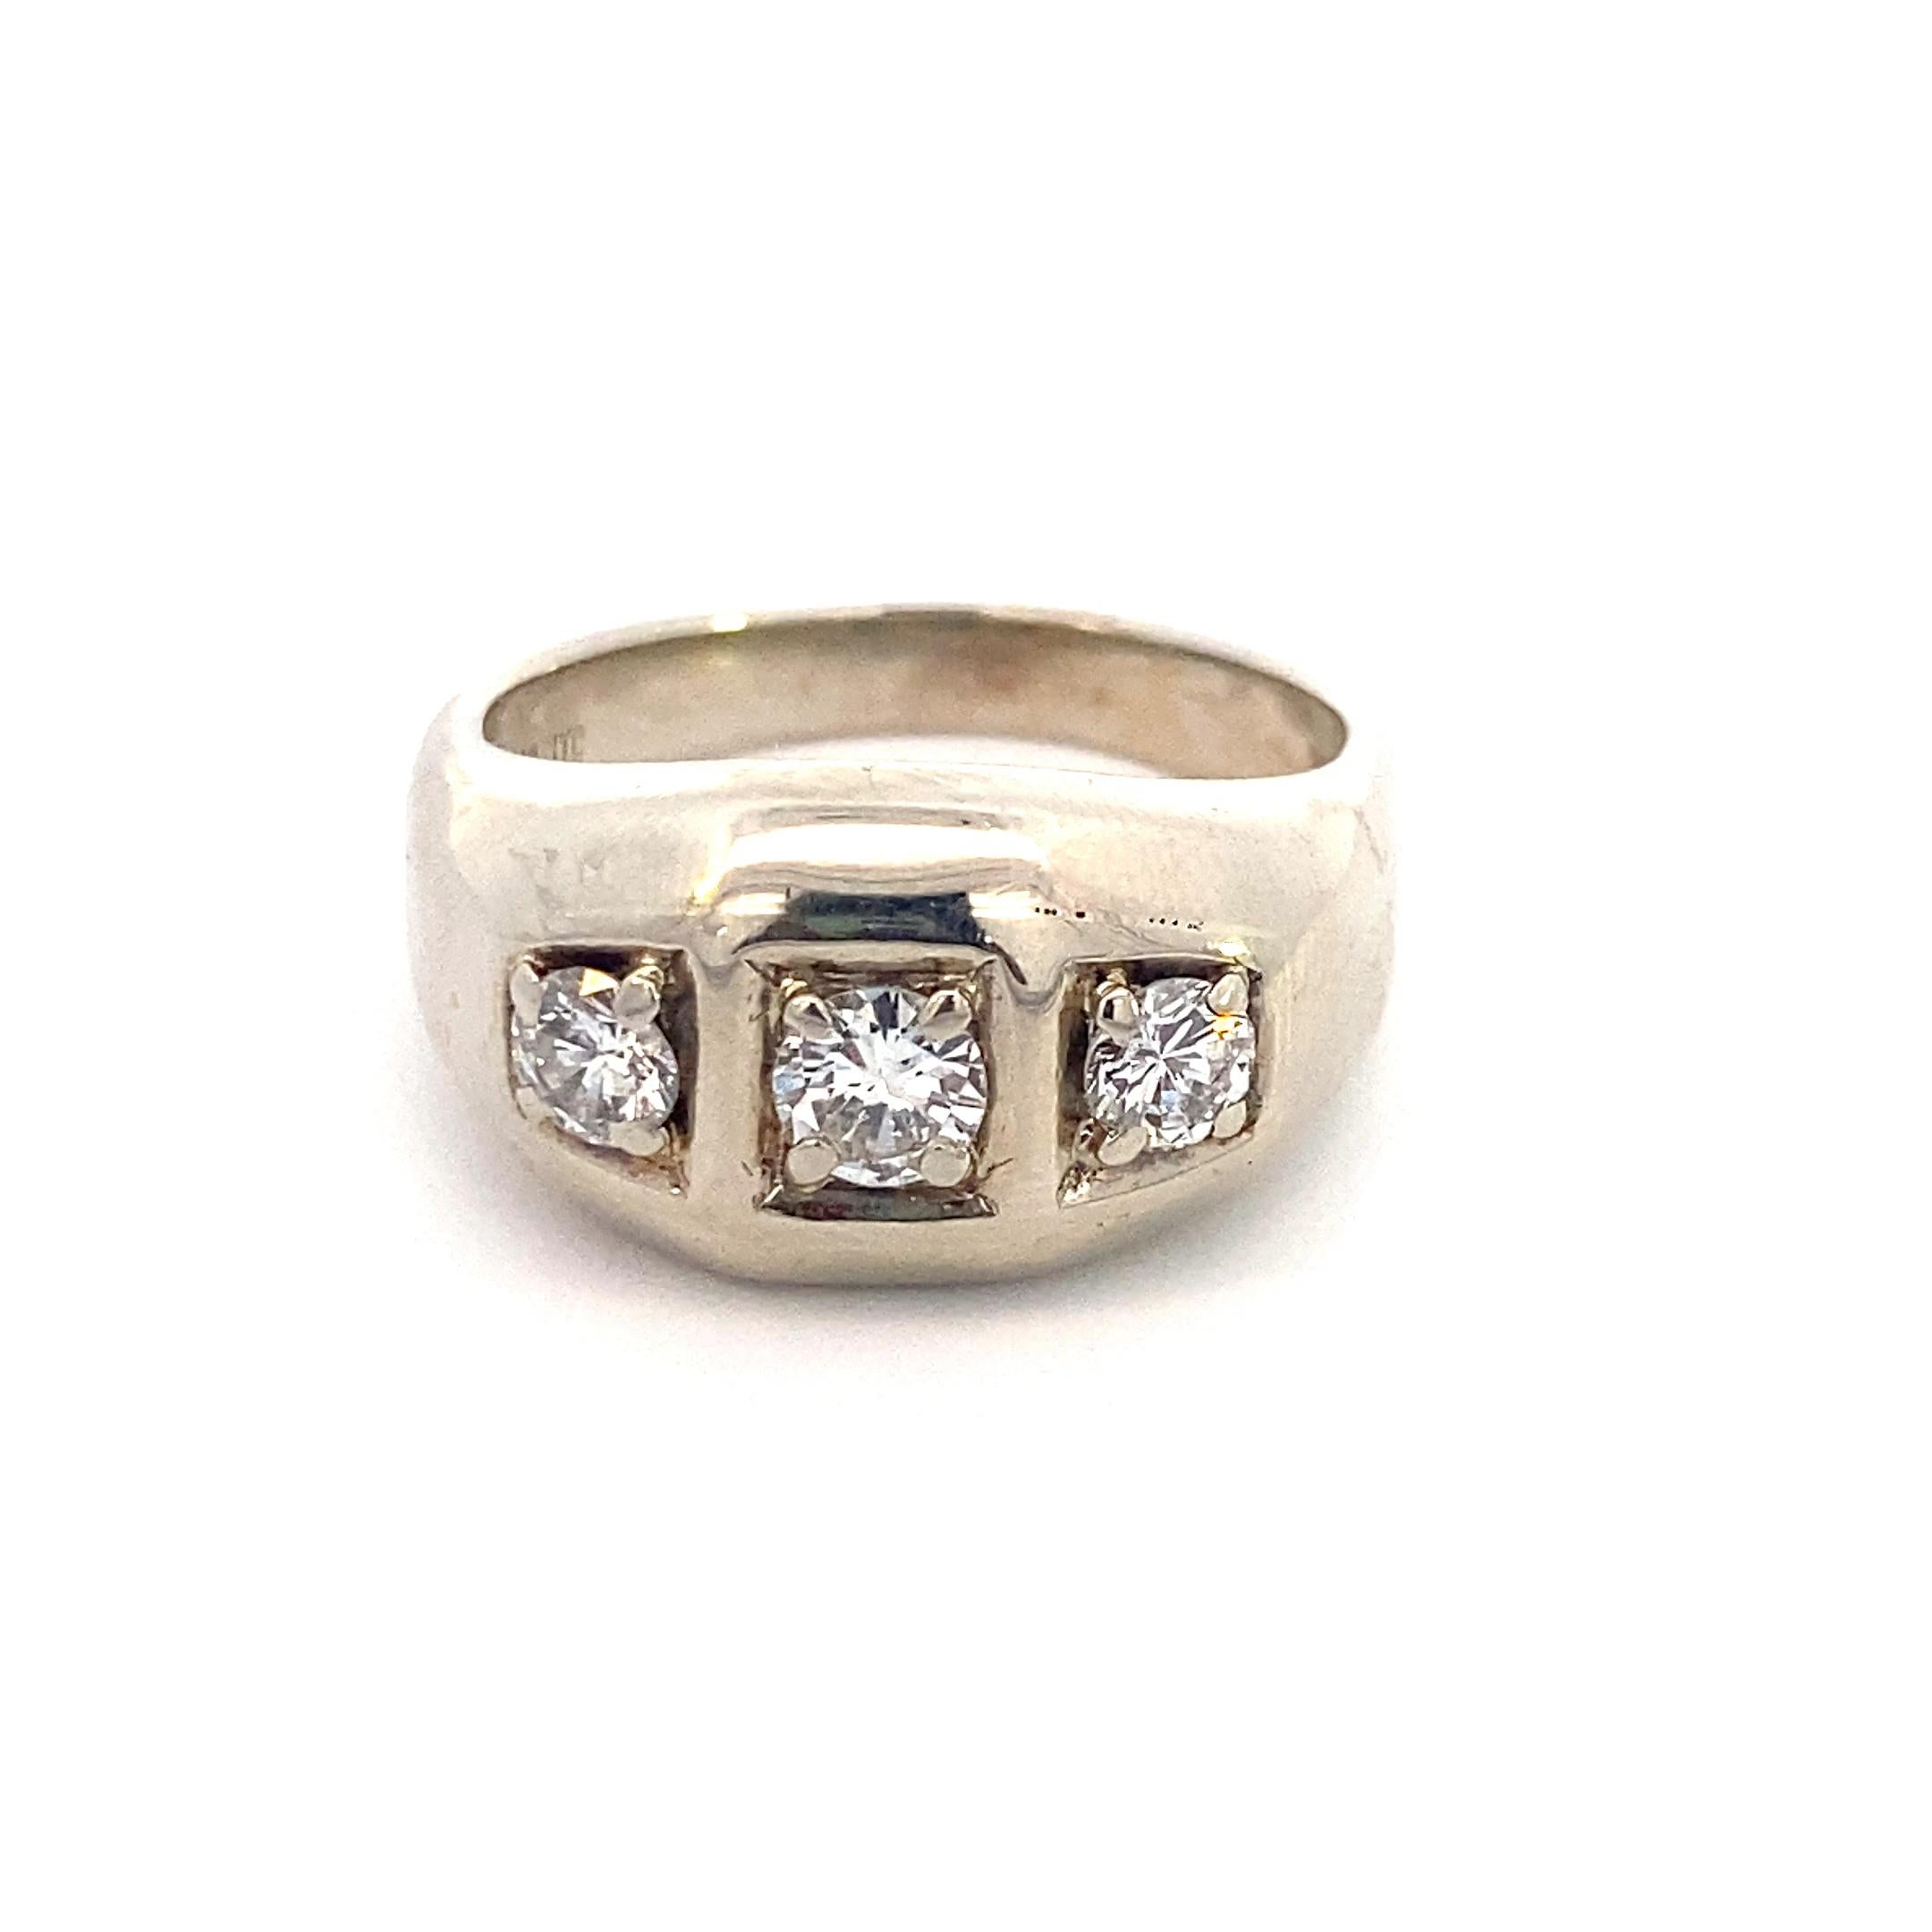 This is a gentlemen's ring. It has 3 beautiful diamonds and is white gold. It is 14K white gold to be more specific and is a size 11.25. The main diamond size is a .50 and the side diamonds are .25. Making this rings total carat weight 1. The total